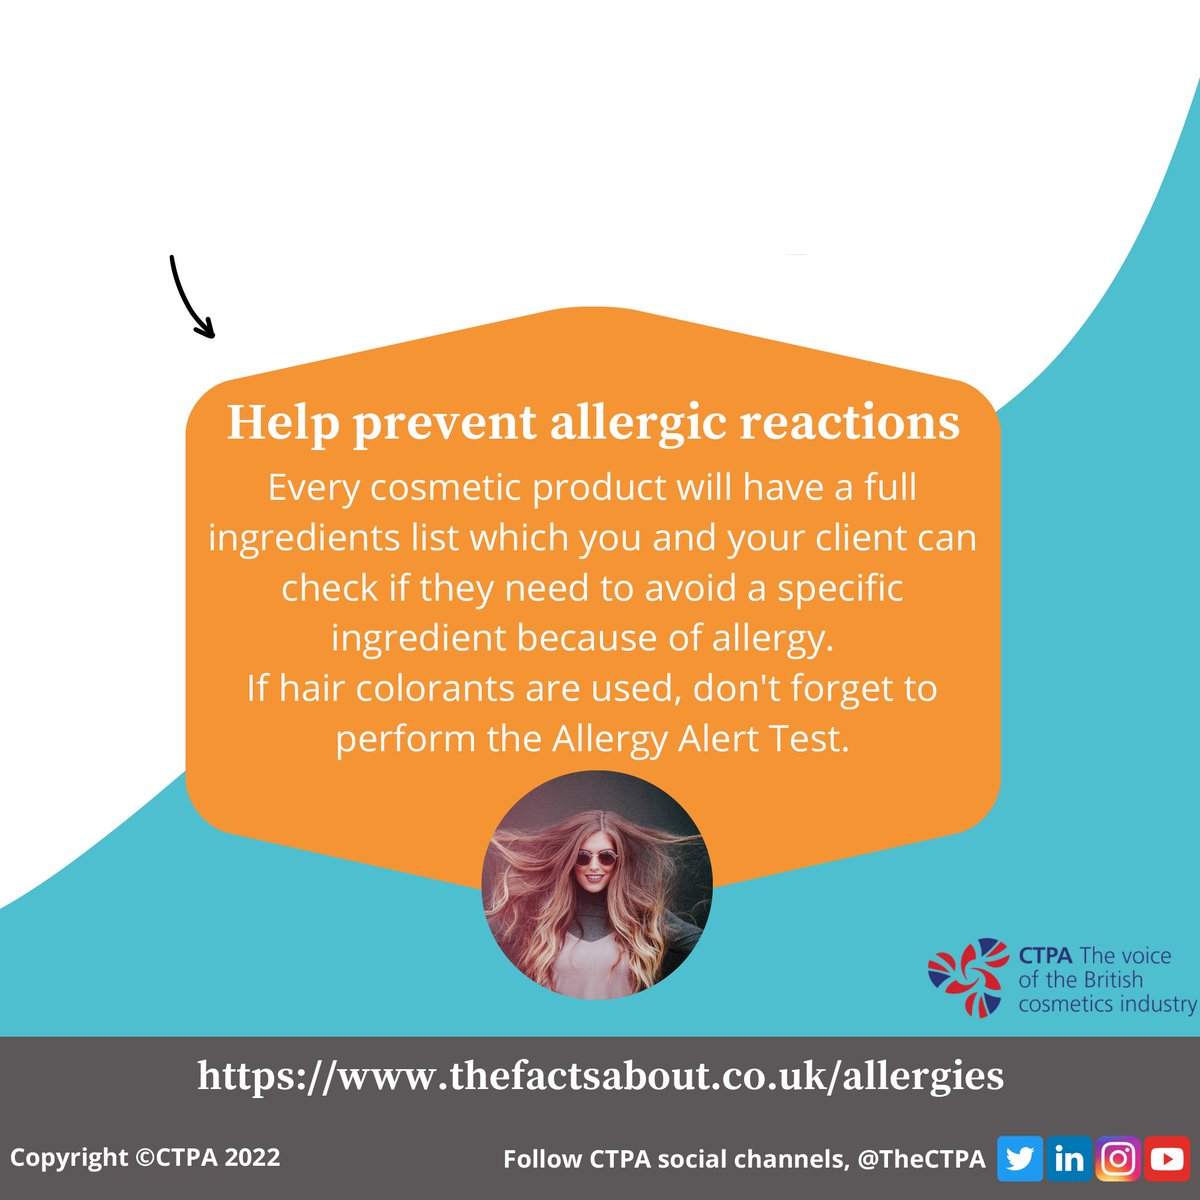 Are you a hair or beauty professional? Do you know what to do if your client has an allergic reaction? Take a look at the infographic by @TheCTPA to check out what to do or visit: ctpa.org.uk/news/new-ctpa-… #nhbf #allergyallert #ukhair #hairandbeauty